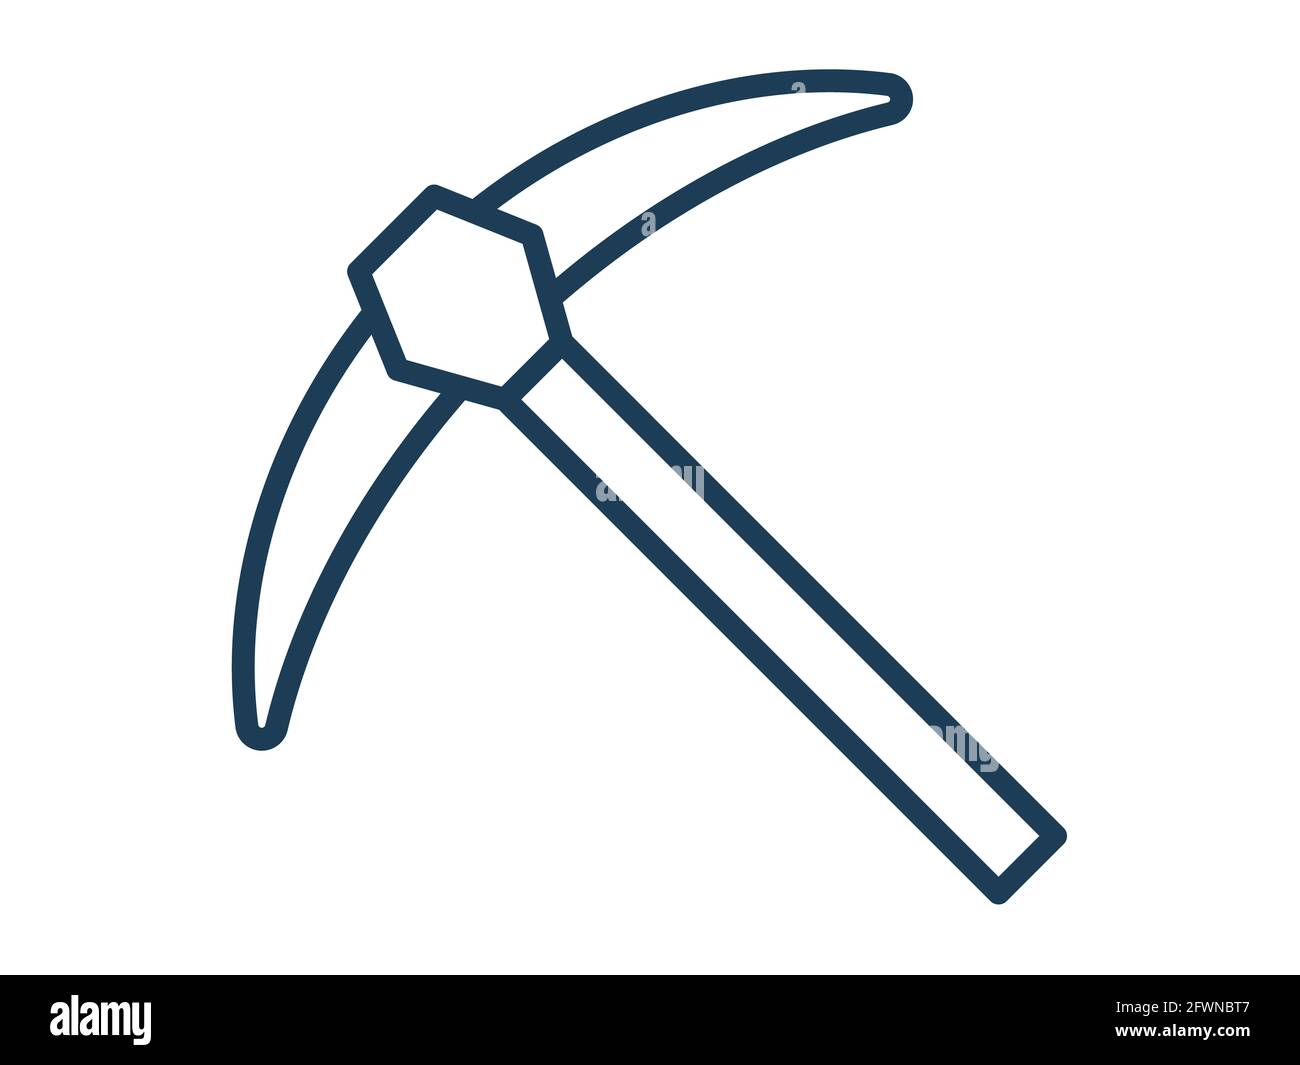 mining axe hammer single icon white isolated background with outline style  vector design illustration Stock Photo - Alamy